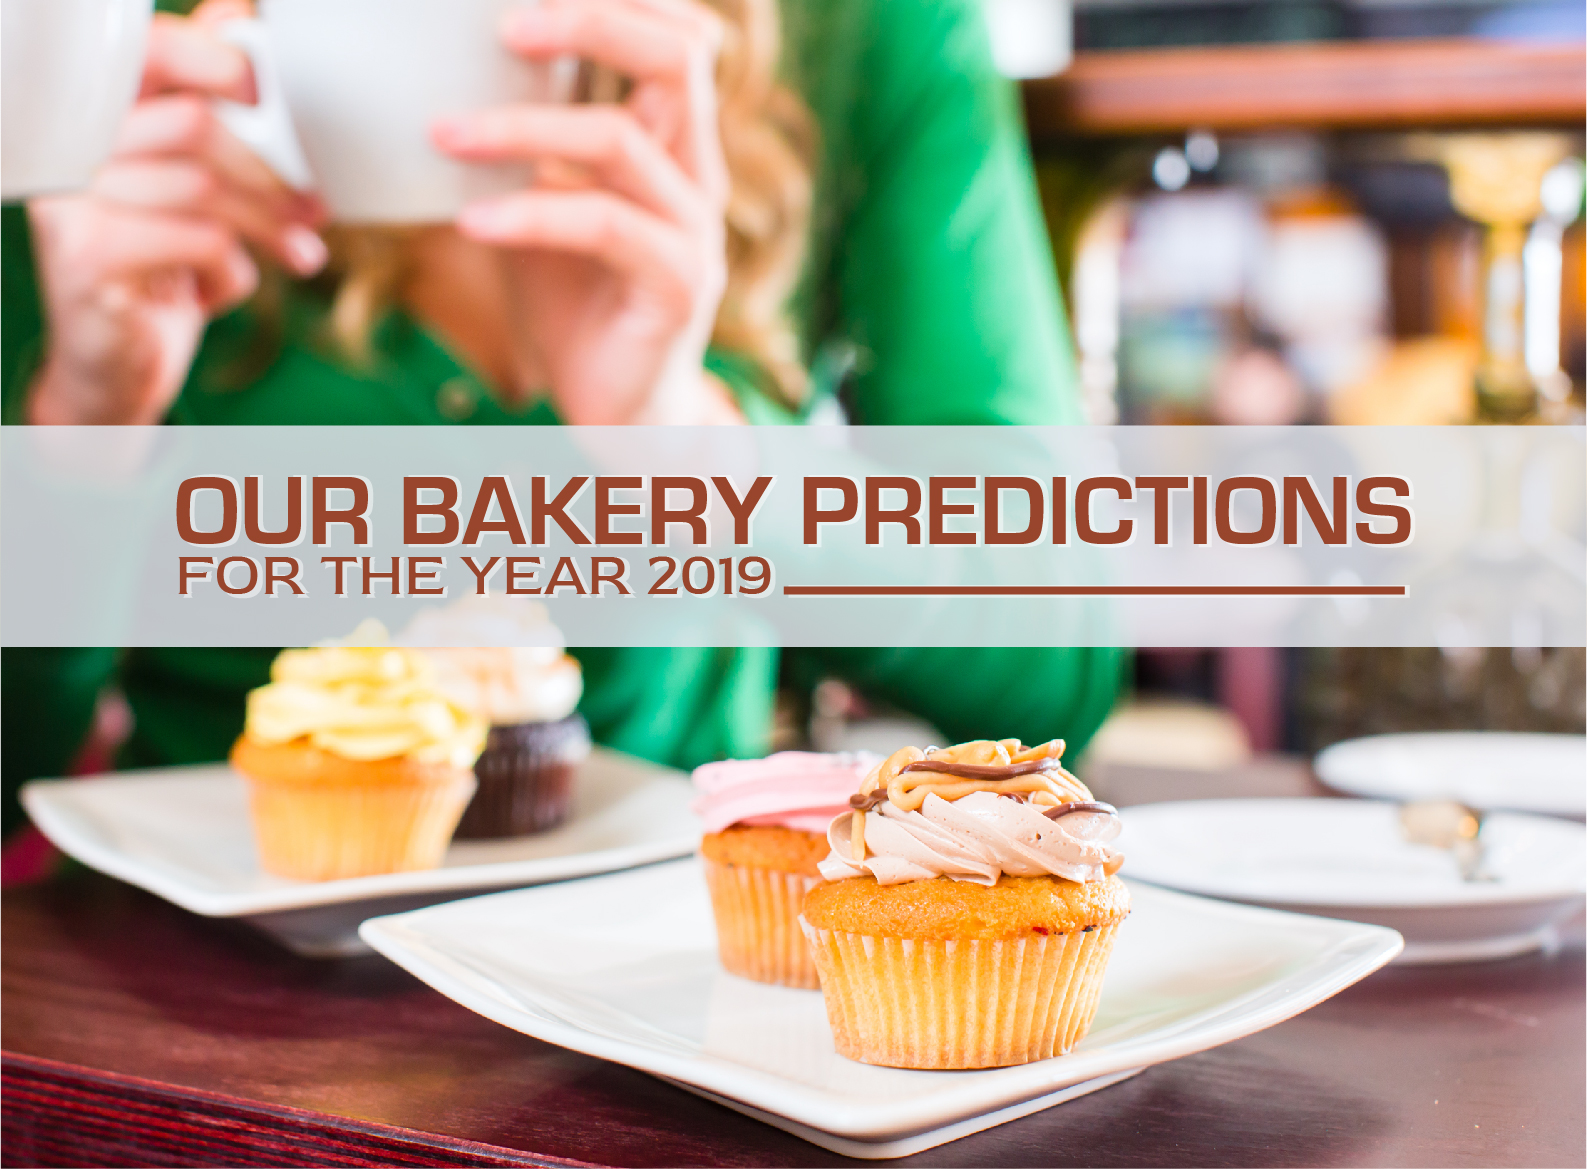 Our Bakery Predictions for the year 2019